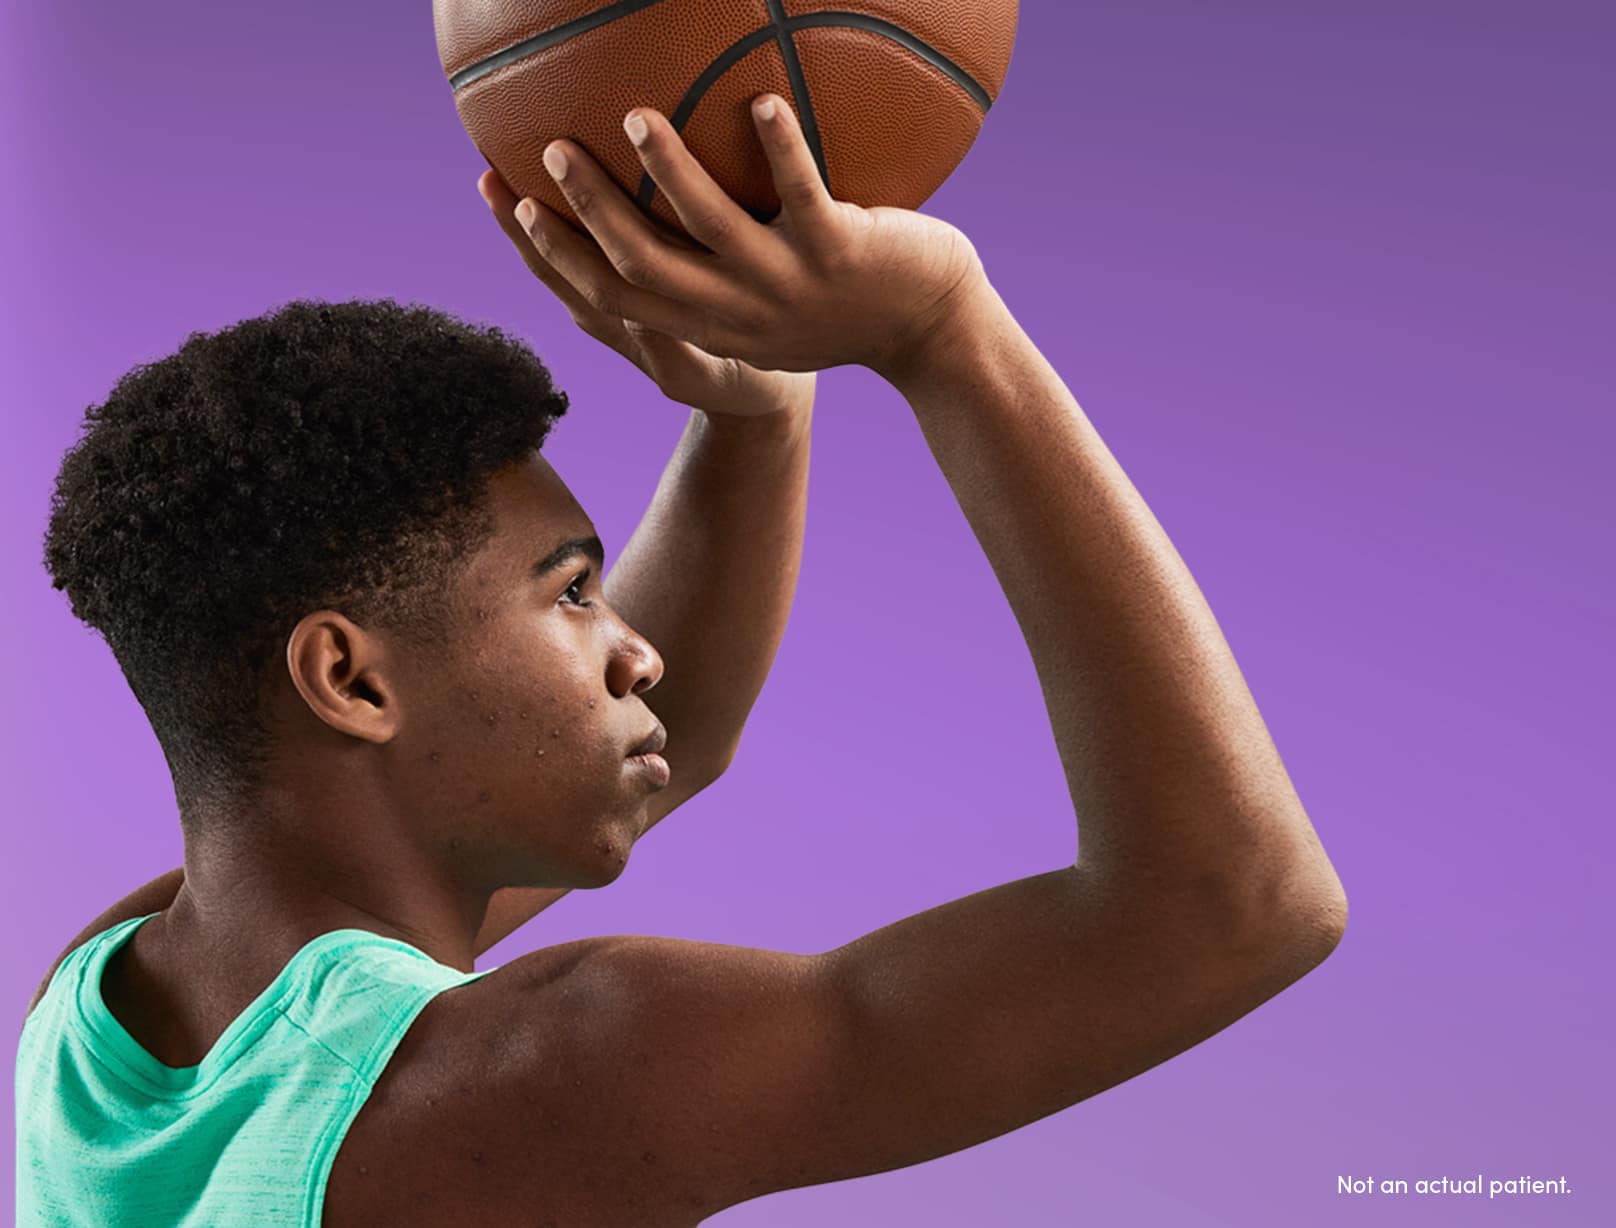 Teen boy ready to shoot basketball reflects confidence gained from using an acne treatment recommended by dermatologists